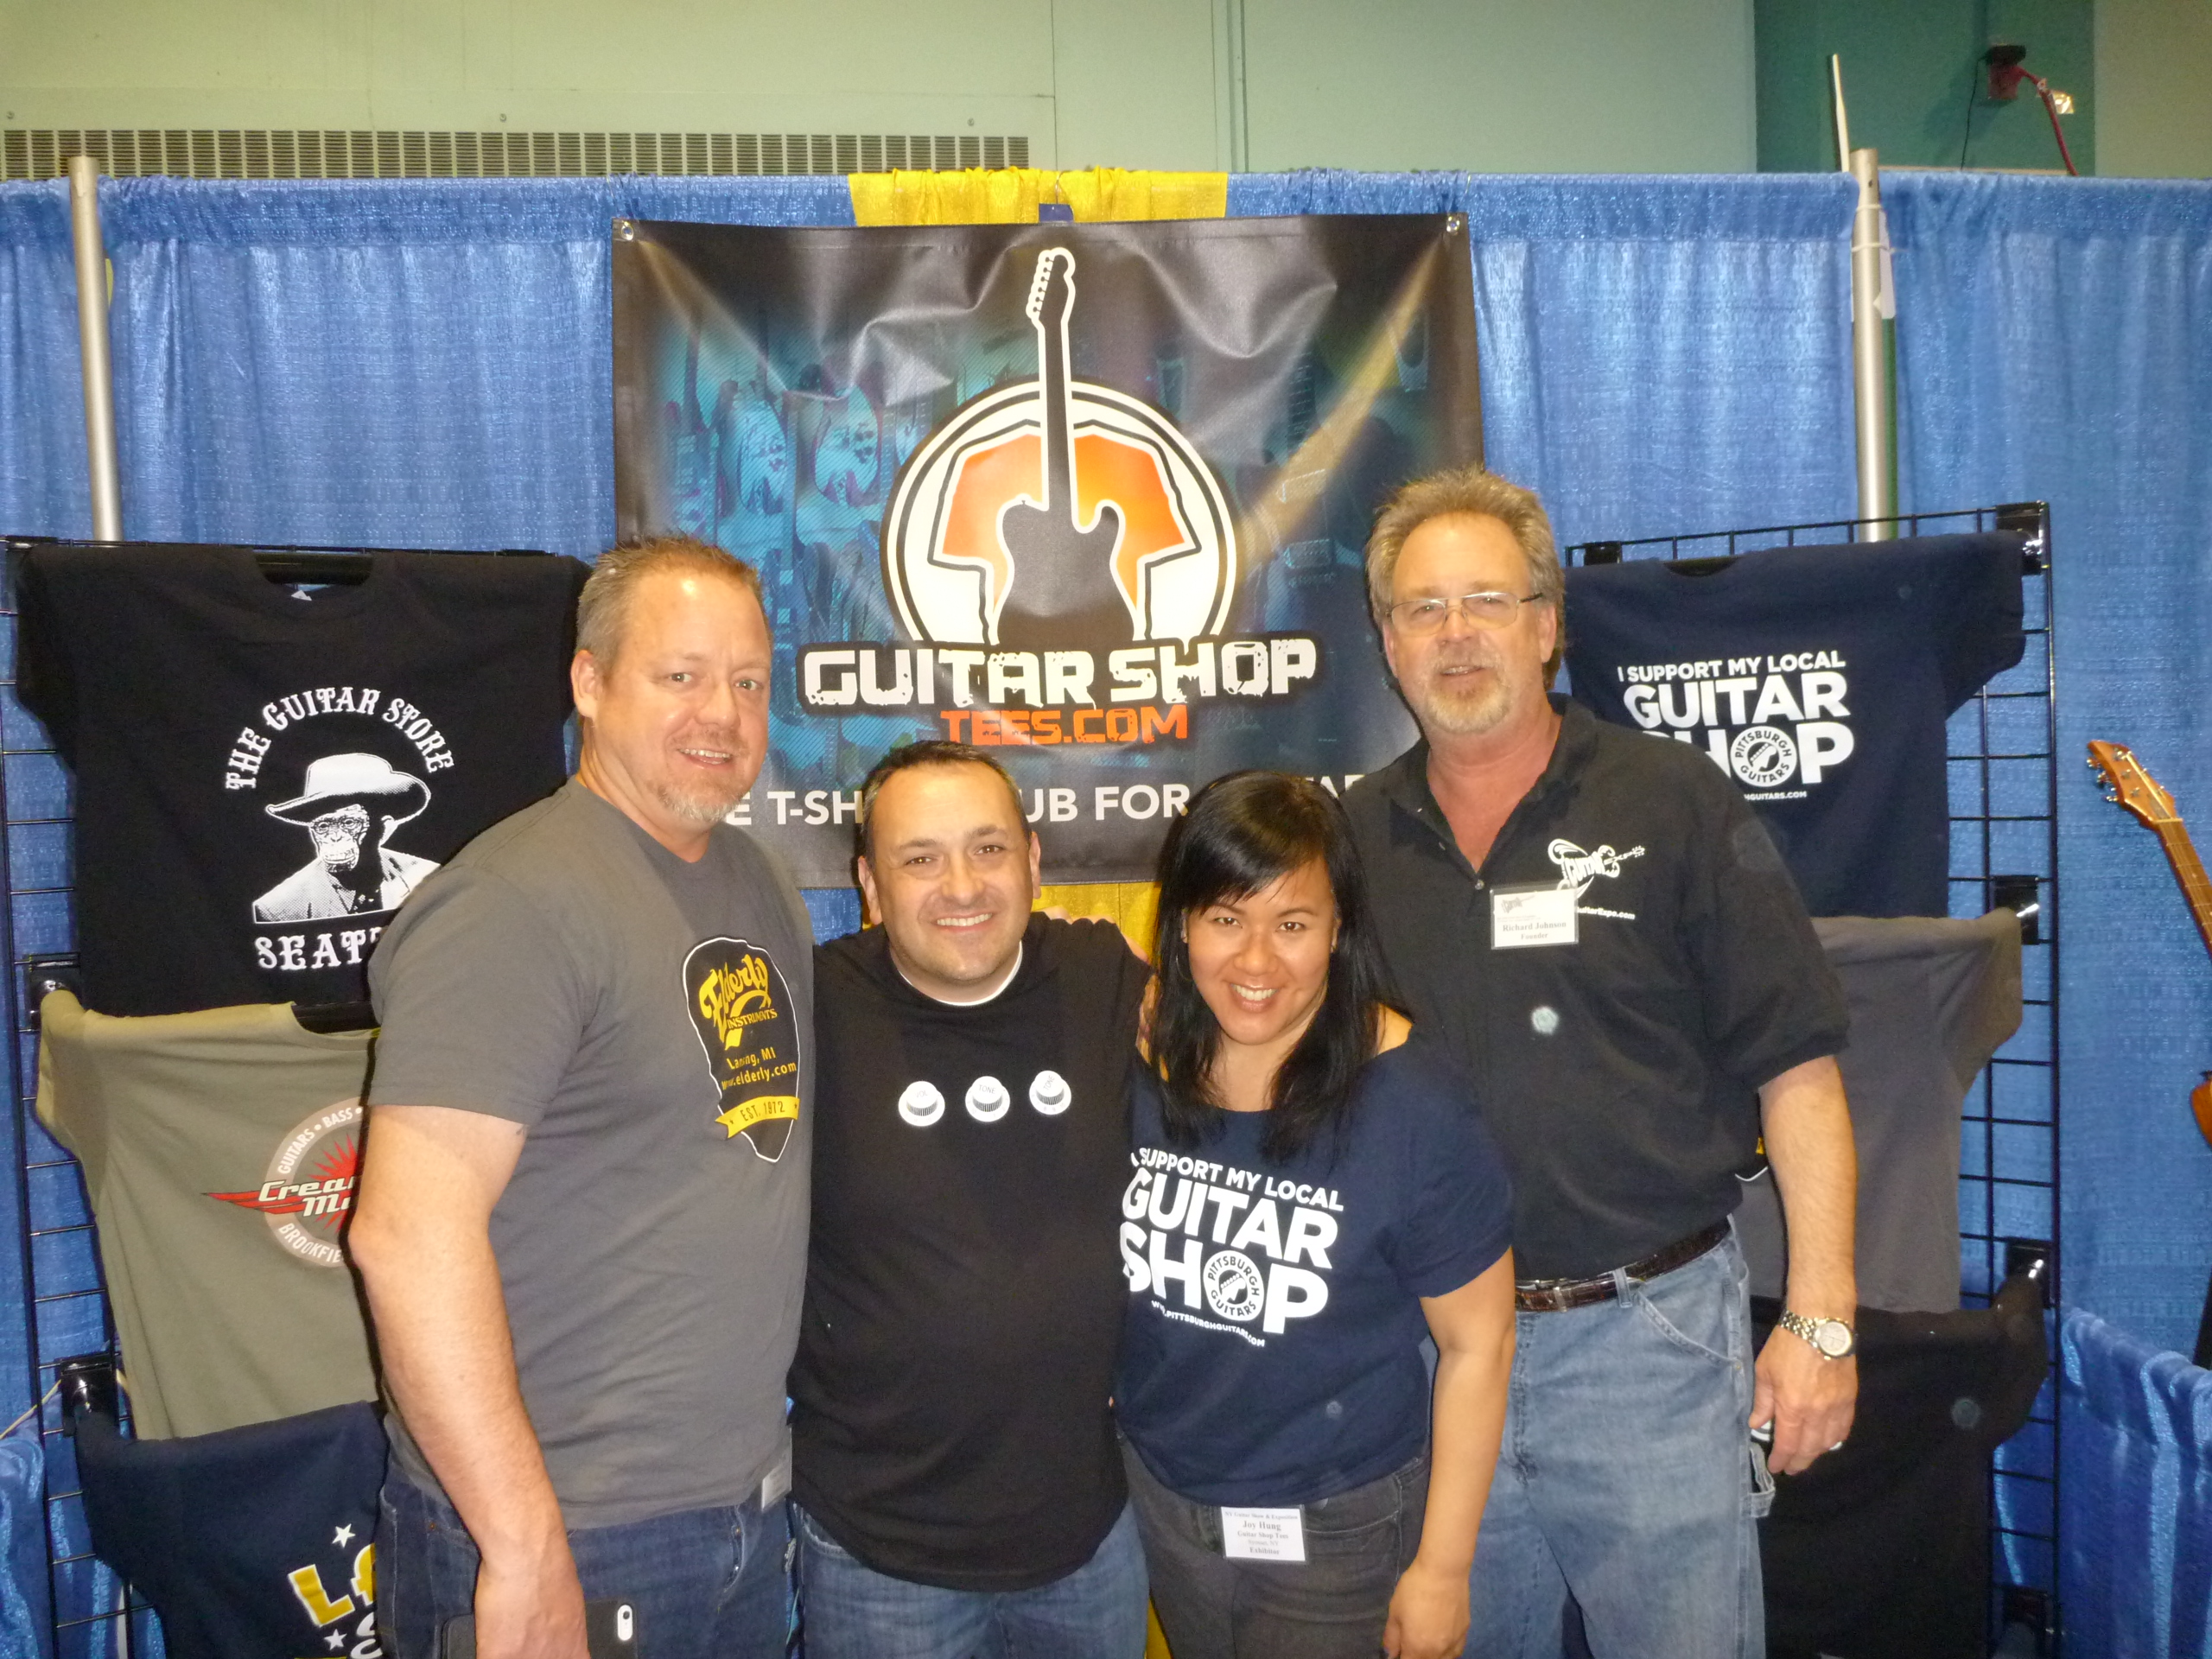 NY Guitar Show founder Rich Johnson (right) with sponsor Eric Feldman and crew of the Guitar Shop Tees.